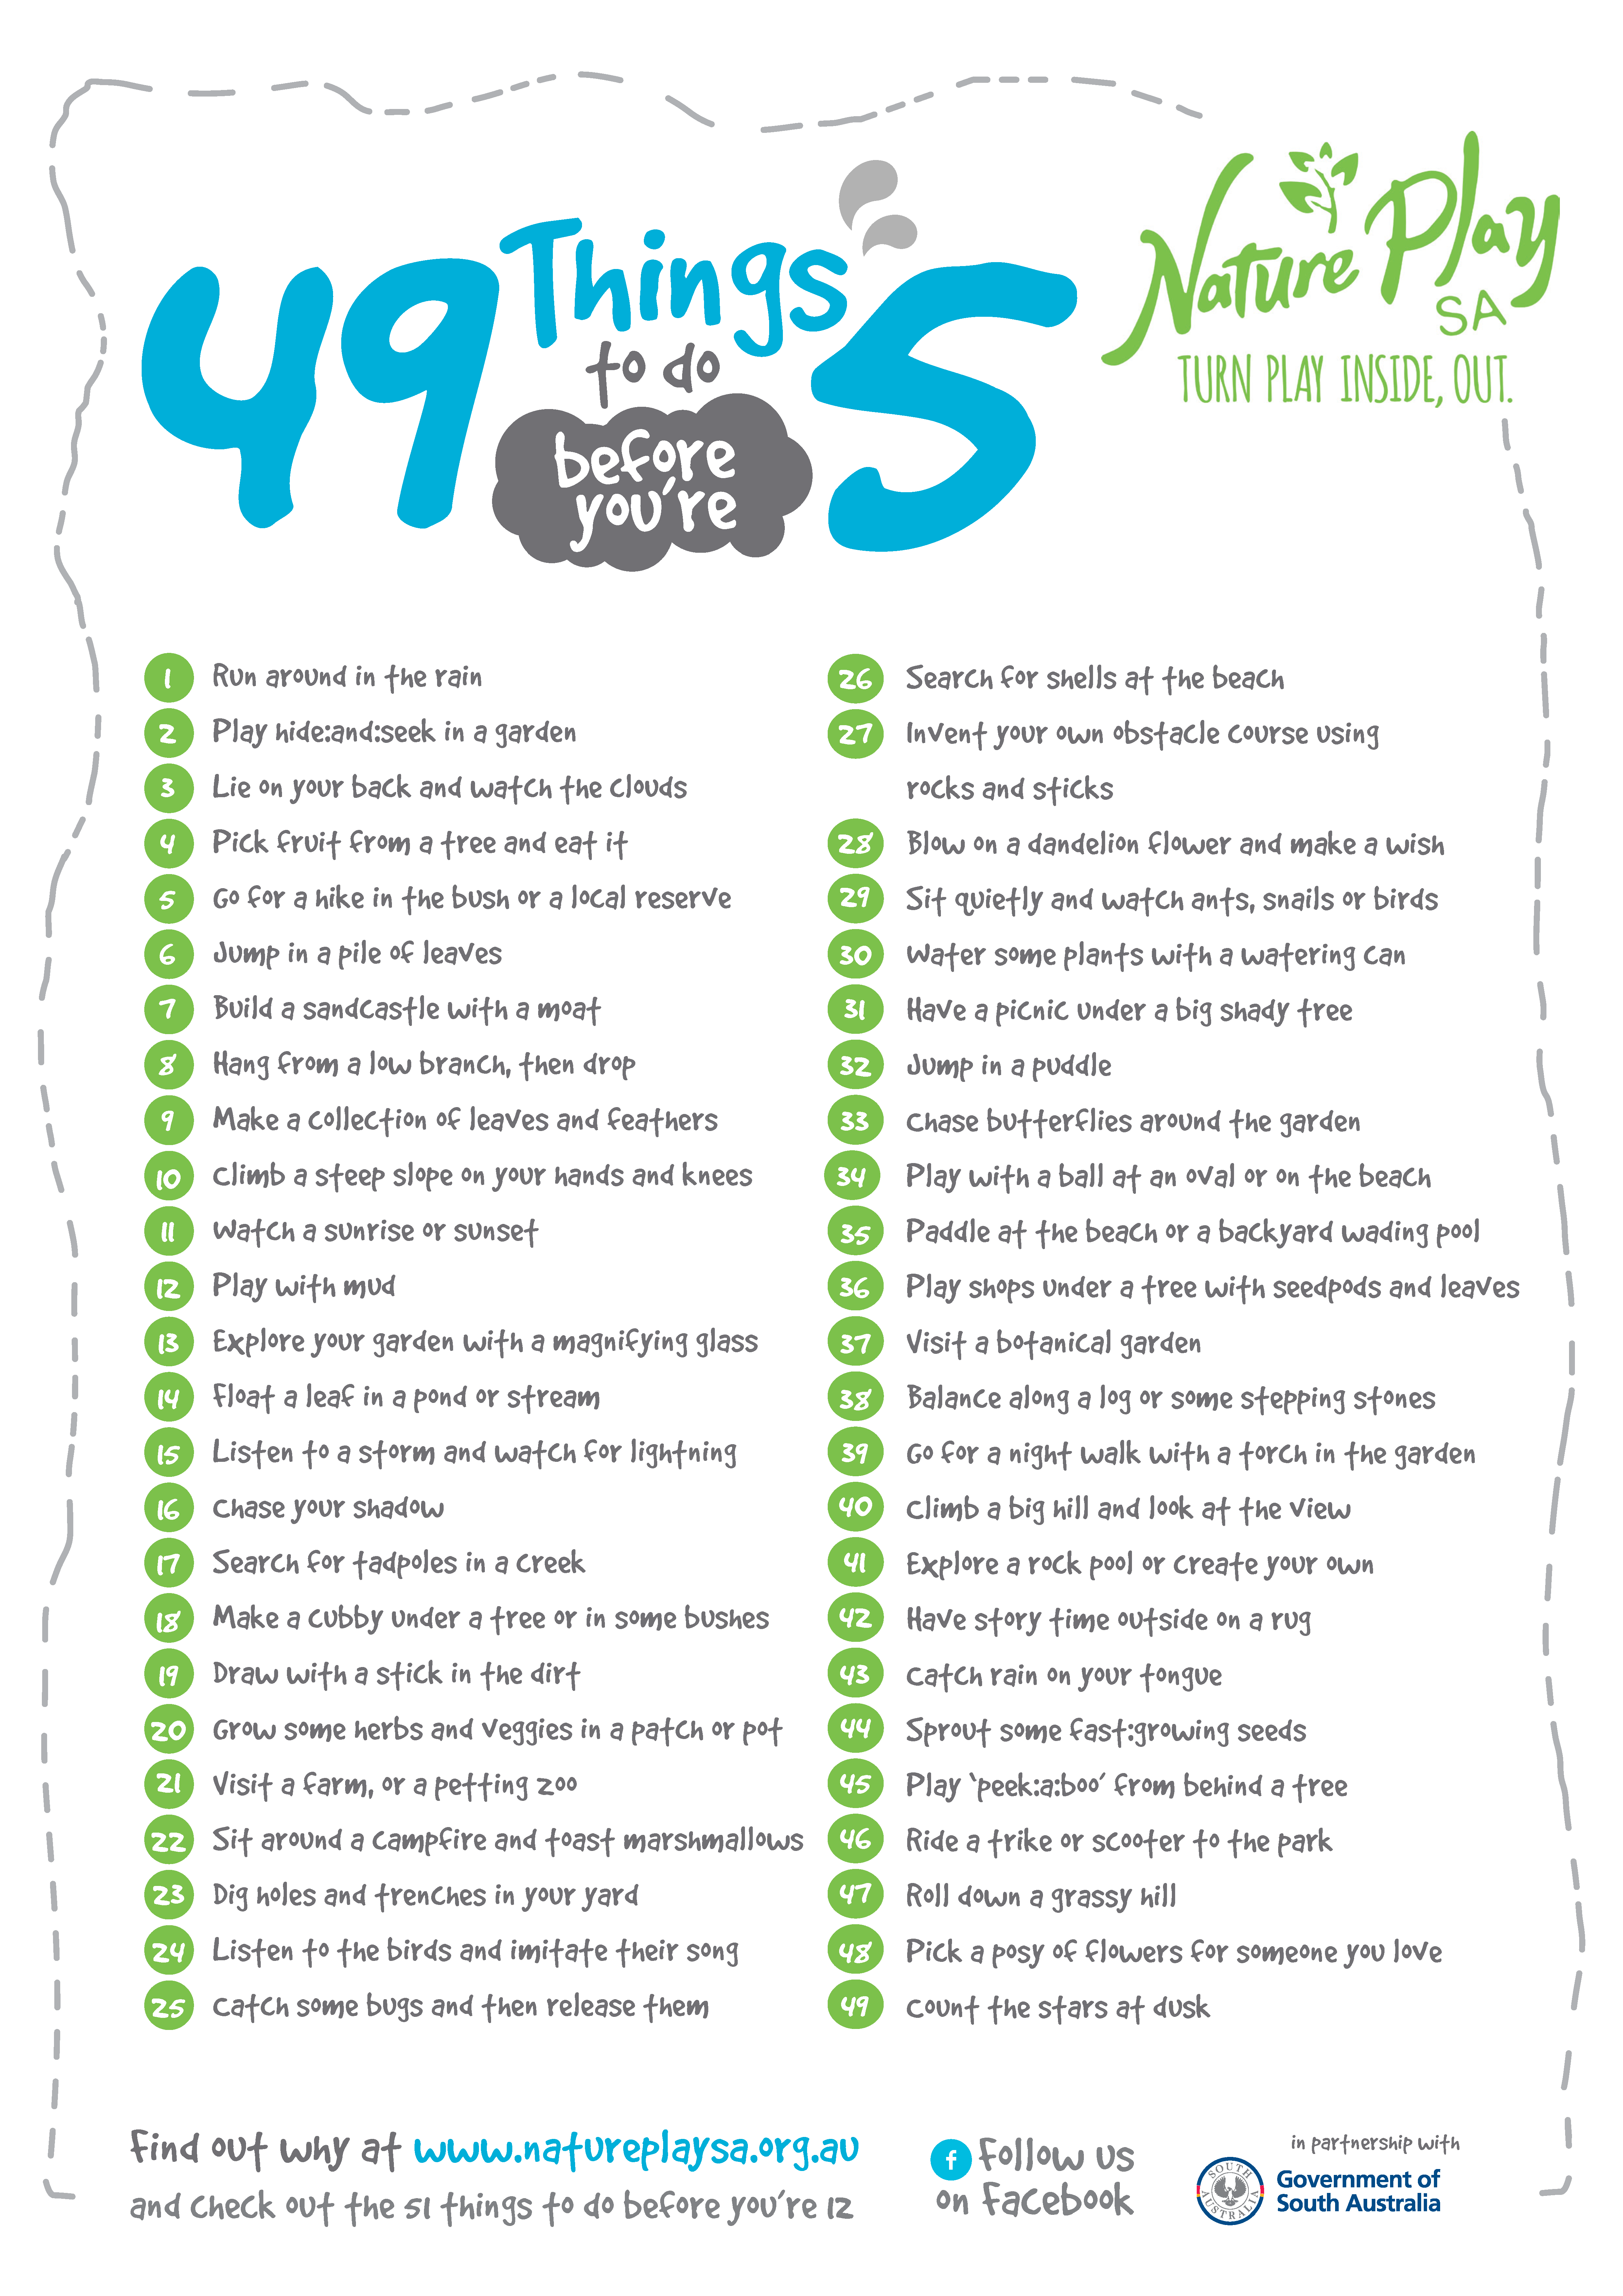 49 things nature play